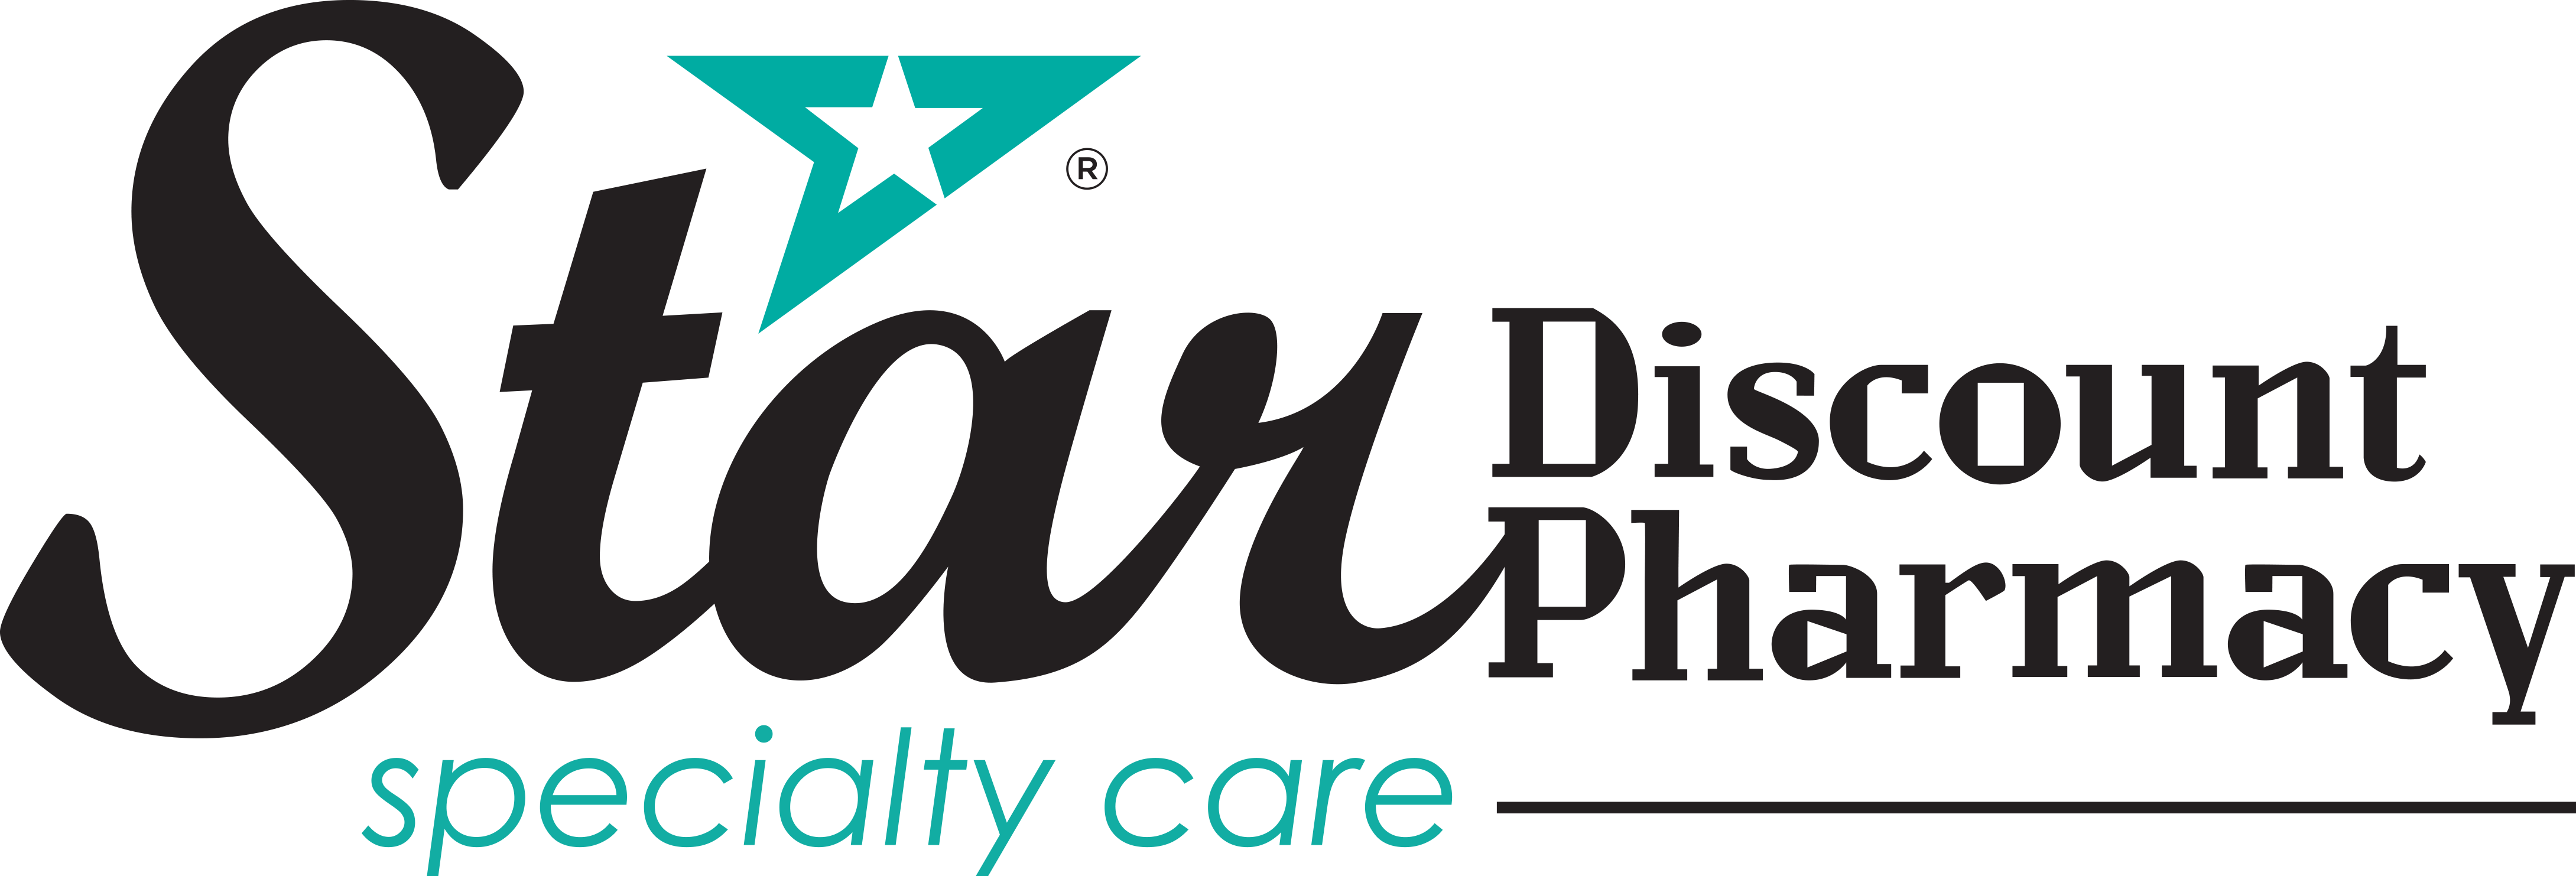 Star Specialty Care